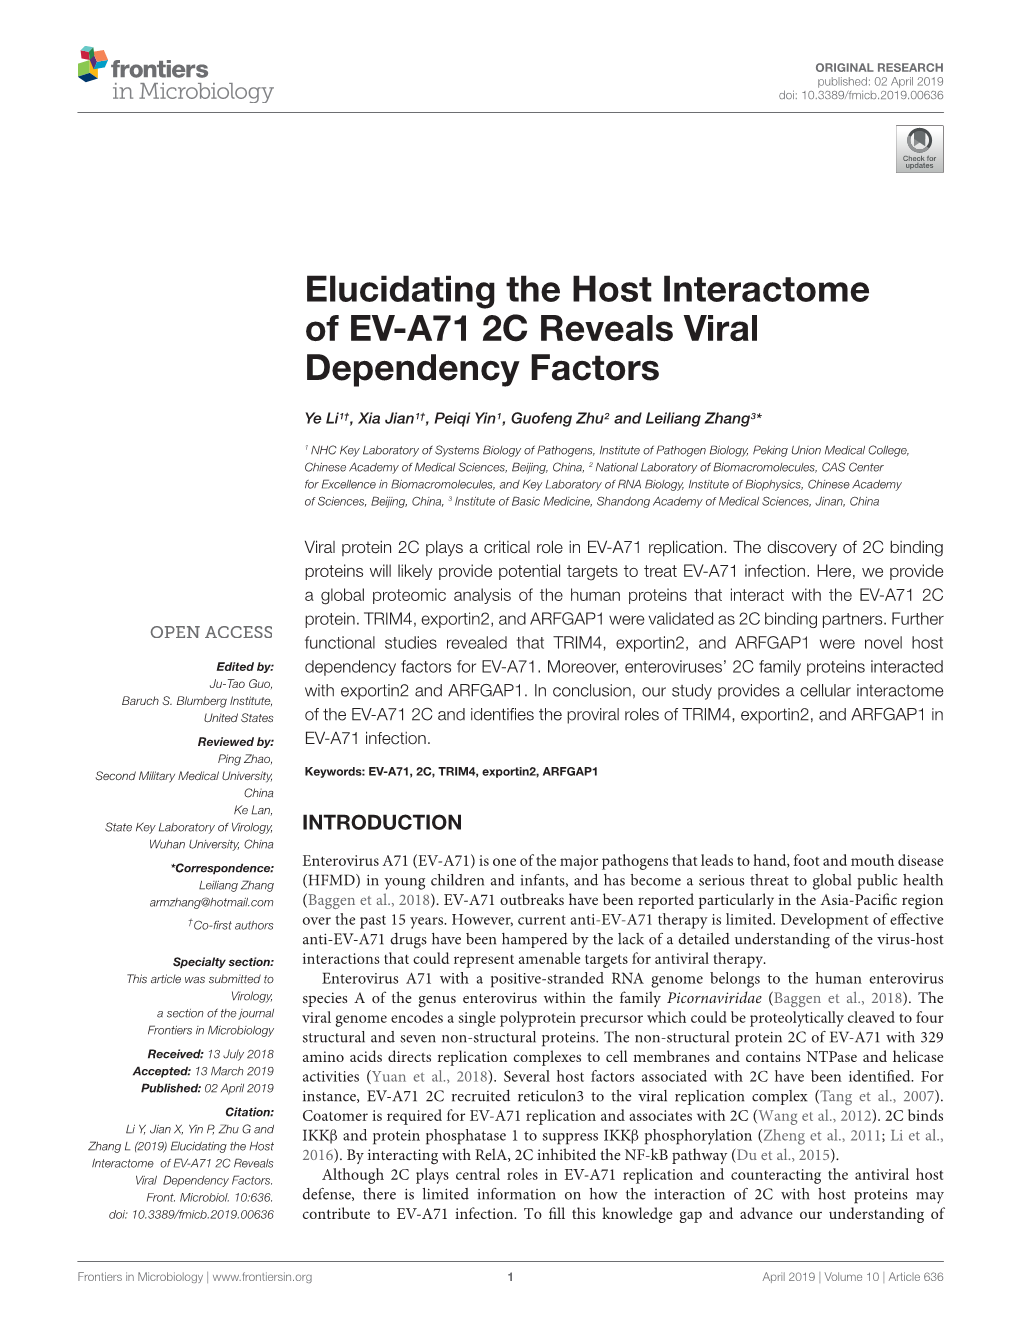 Elucidating the Host Interactome of EV-A71 2C Reveals Viral Dependency Factors